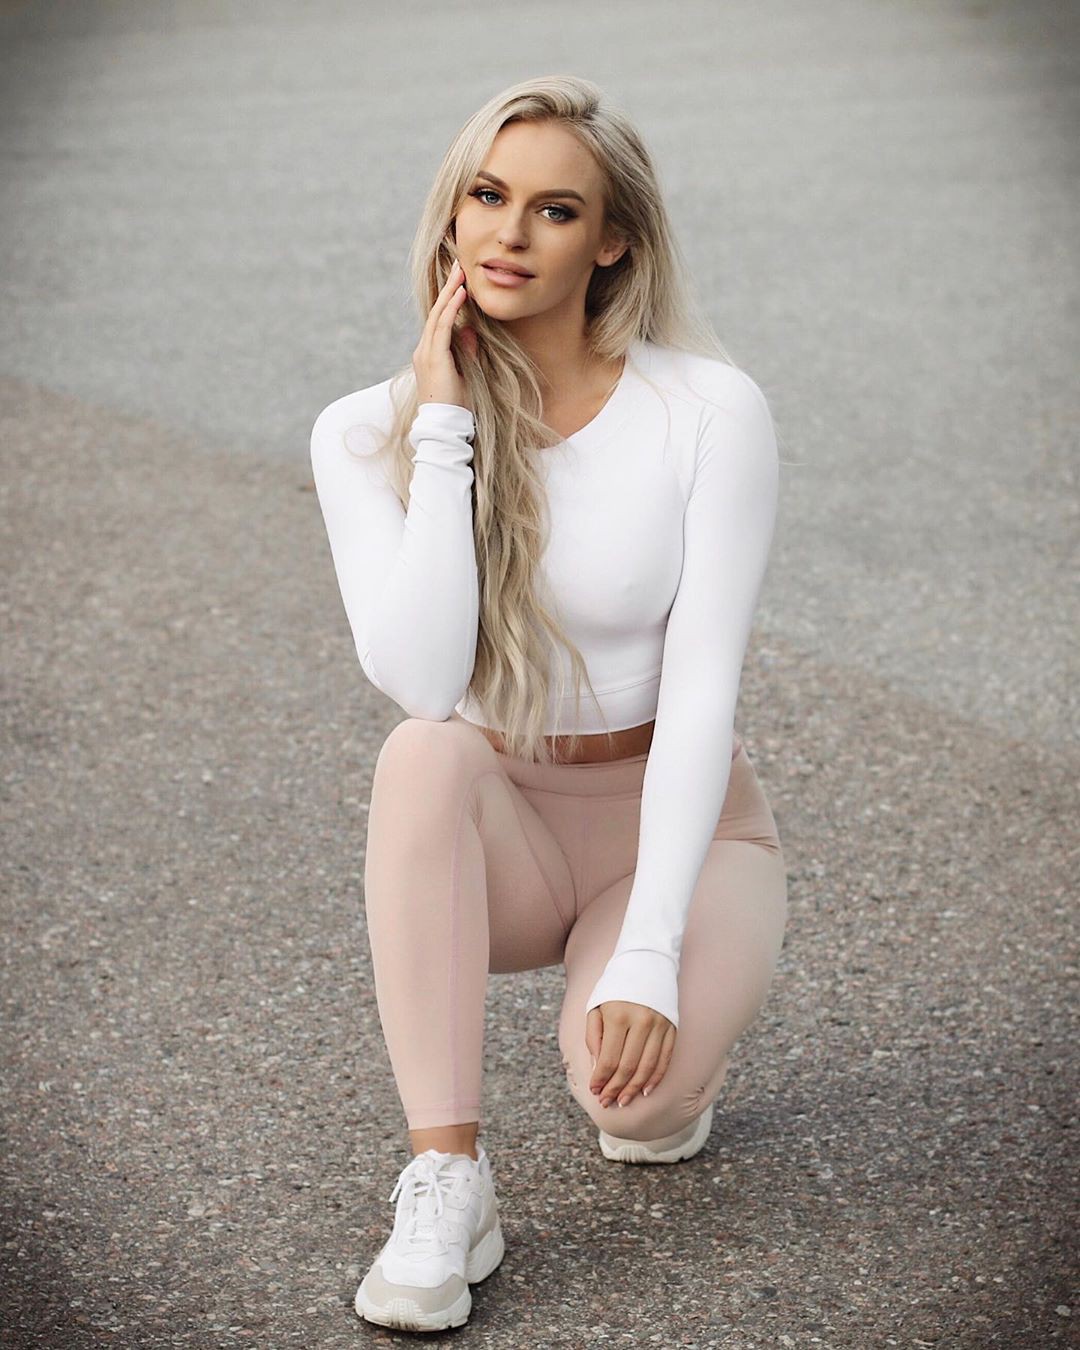 Anna Nystrom Instagram Pictures, Anna Nystrom, Photo shoot: Beauty Pageant,  Photo shoot,  Anna Nystrom  